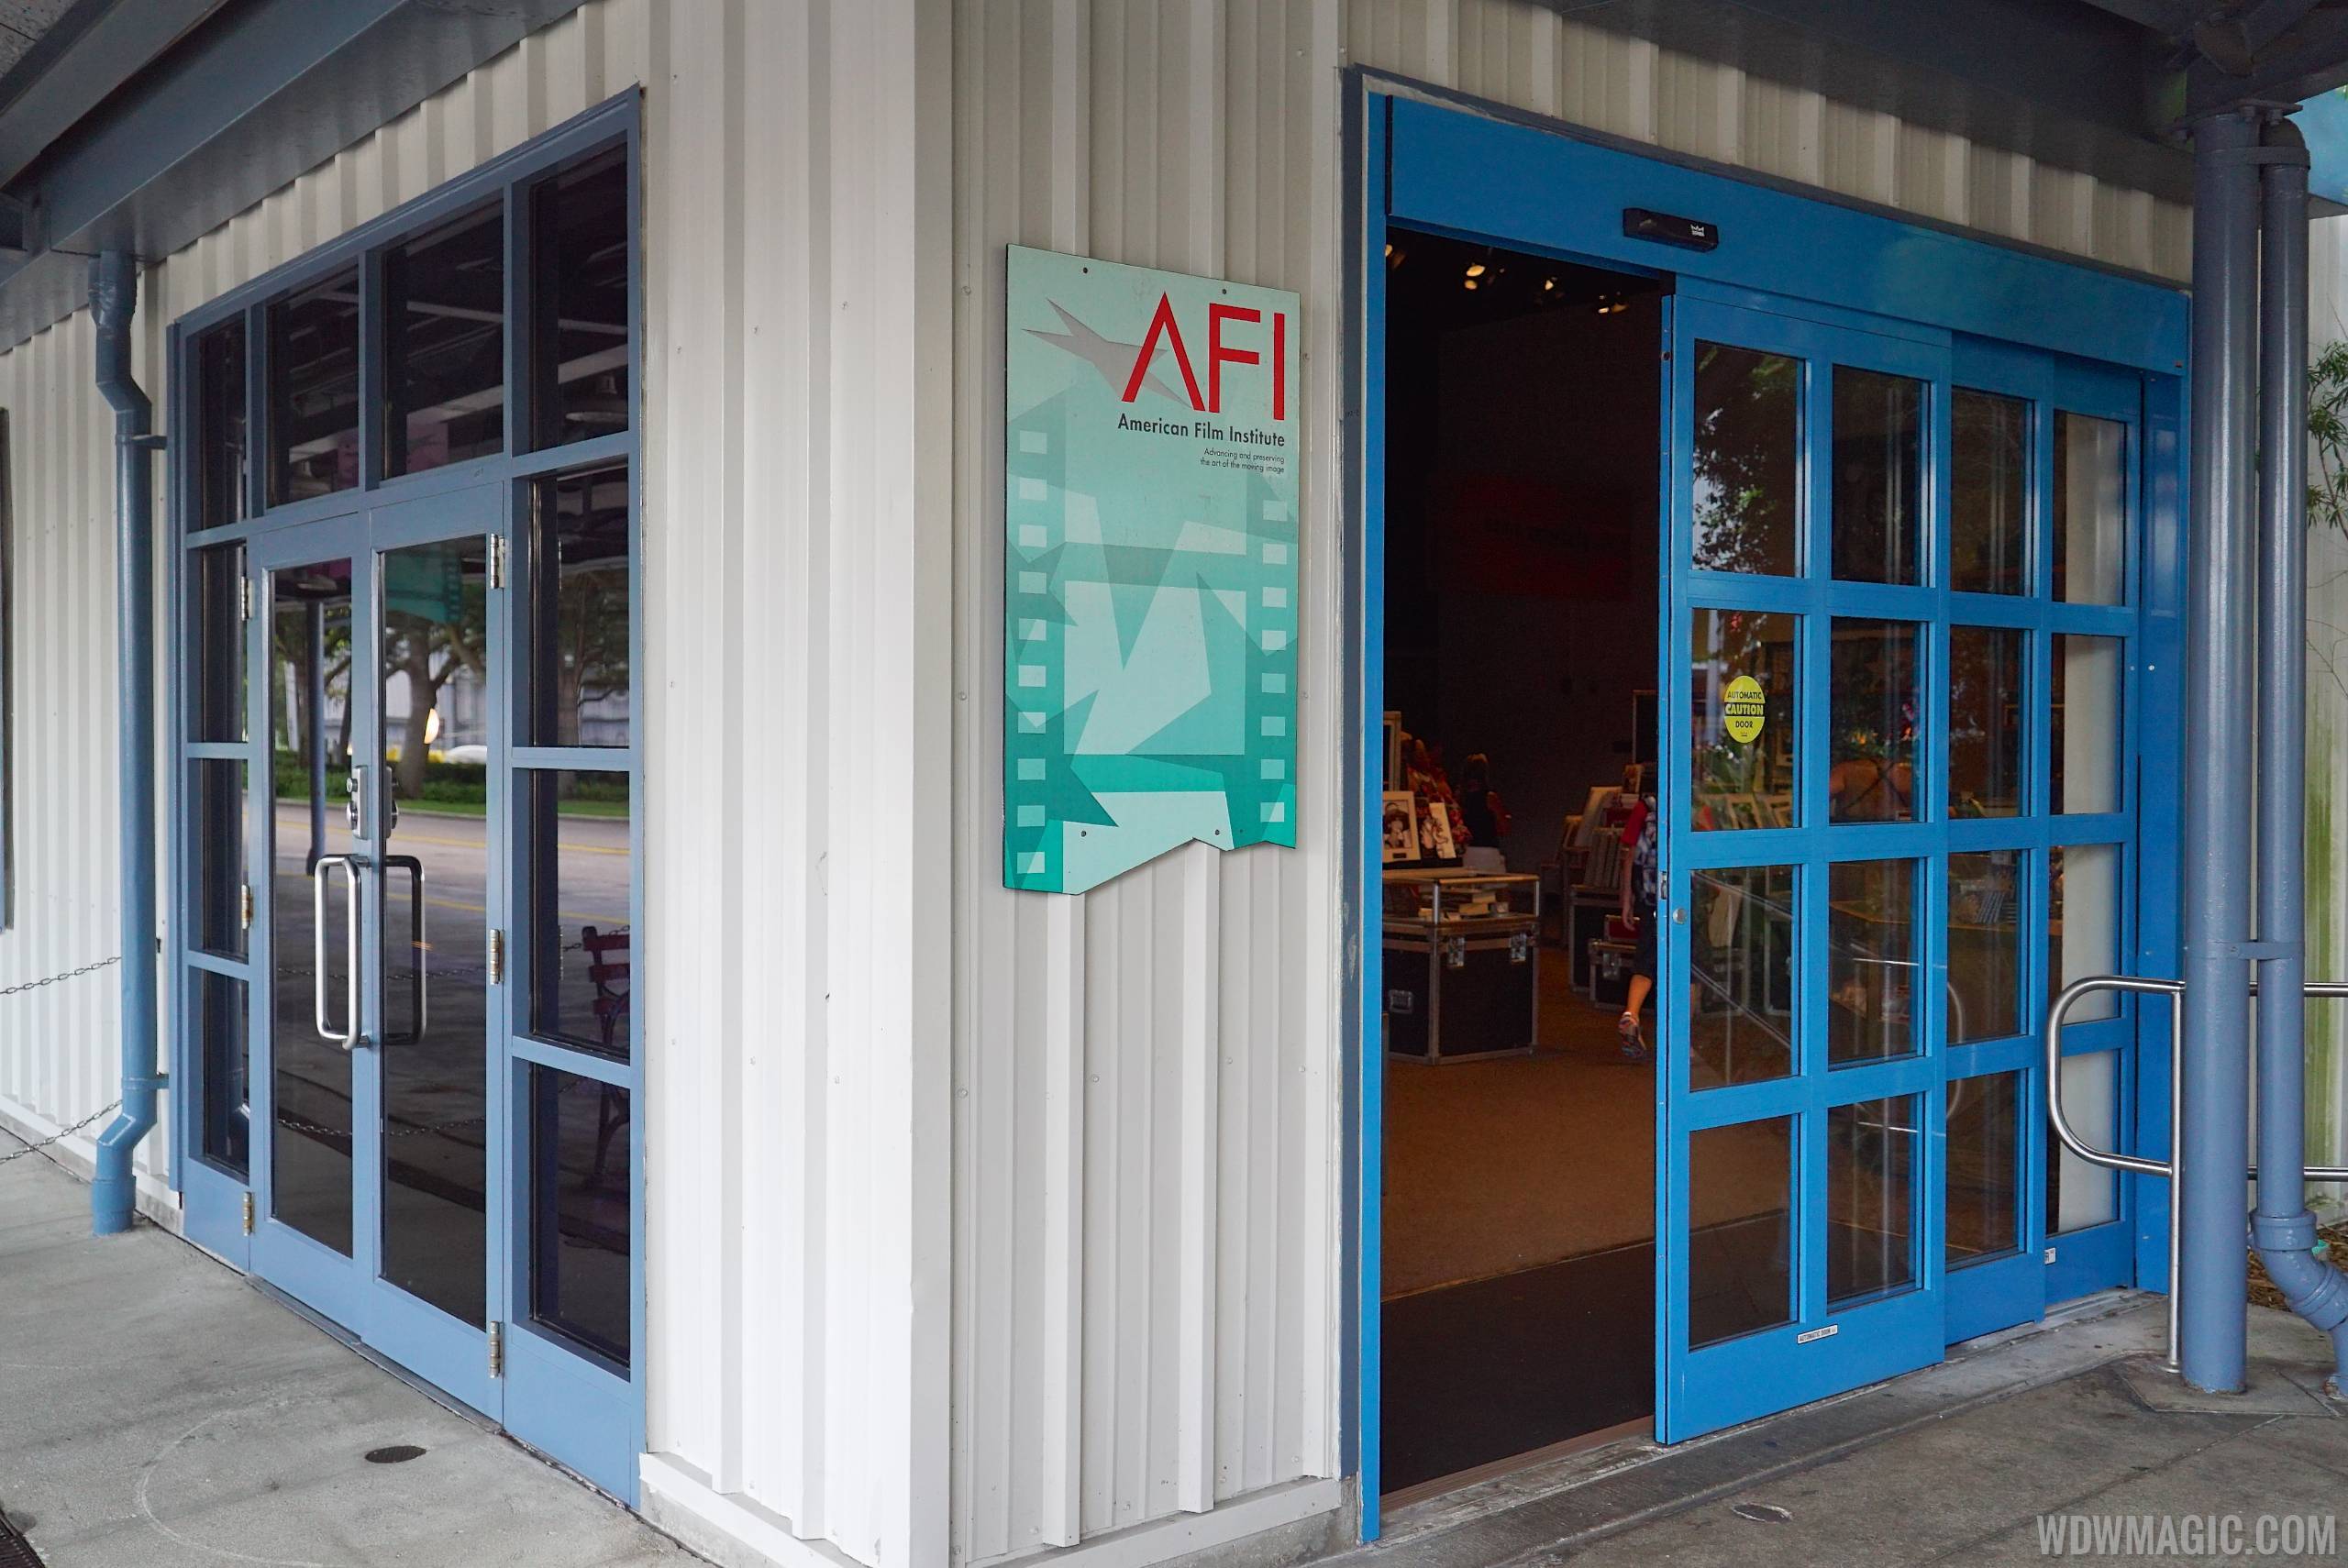 American Film Institute exhibit - Exit and entrance to The Showcase Shop